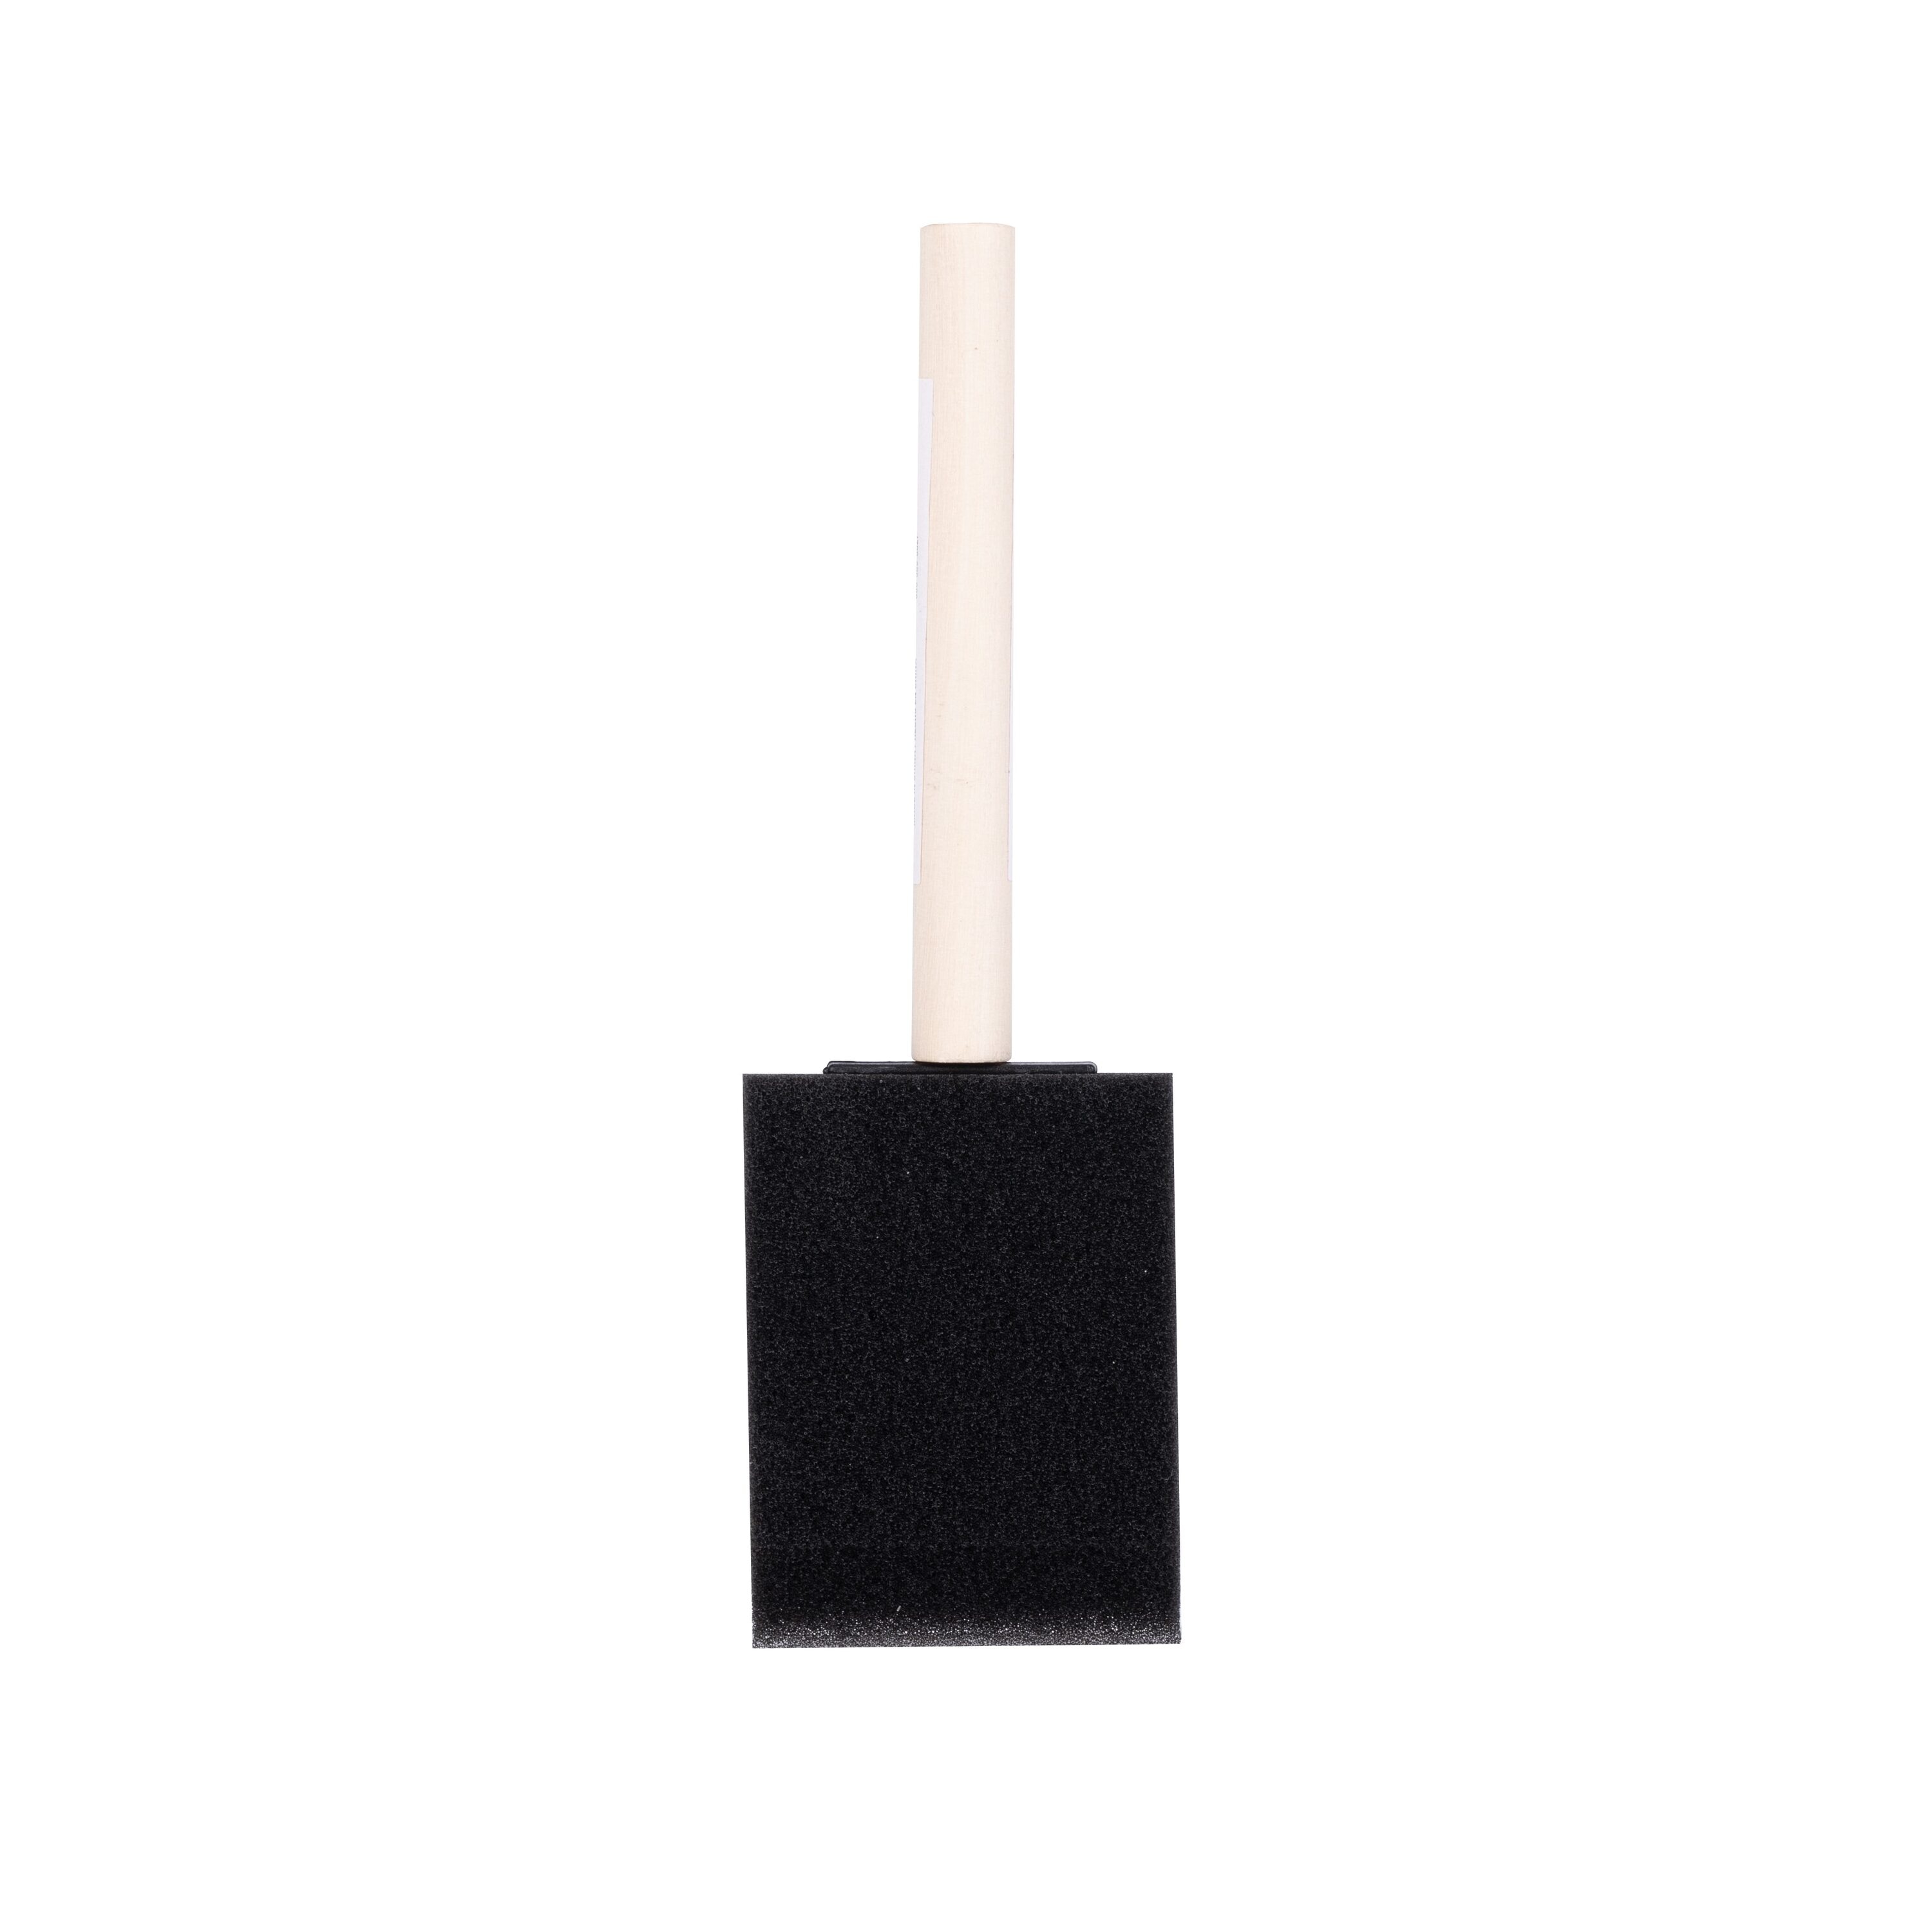 200 Pack Foam Brush Bulk Foam Paint Brushes Sponge Black Foam Brushes for  Painting 1 Inch with Handle Wood Grip Foam Art Paintbrushes for Paint  Crafts Art Acrylics Stains